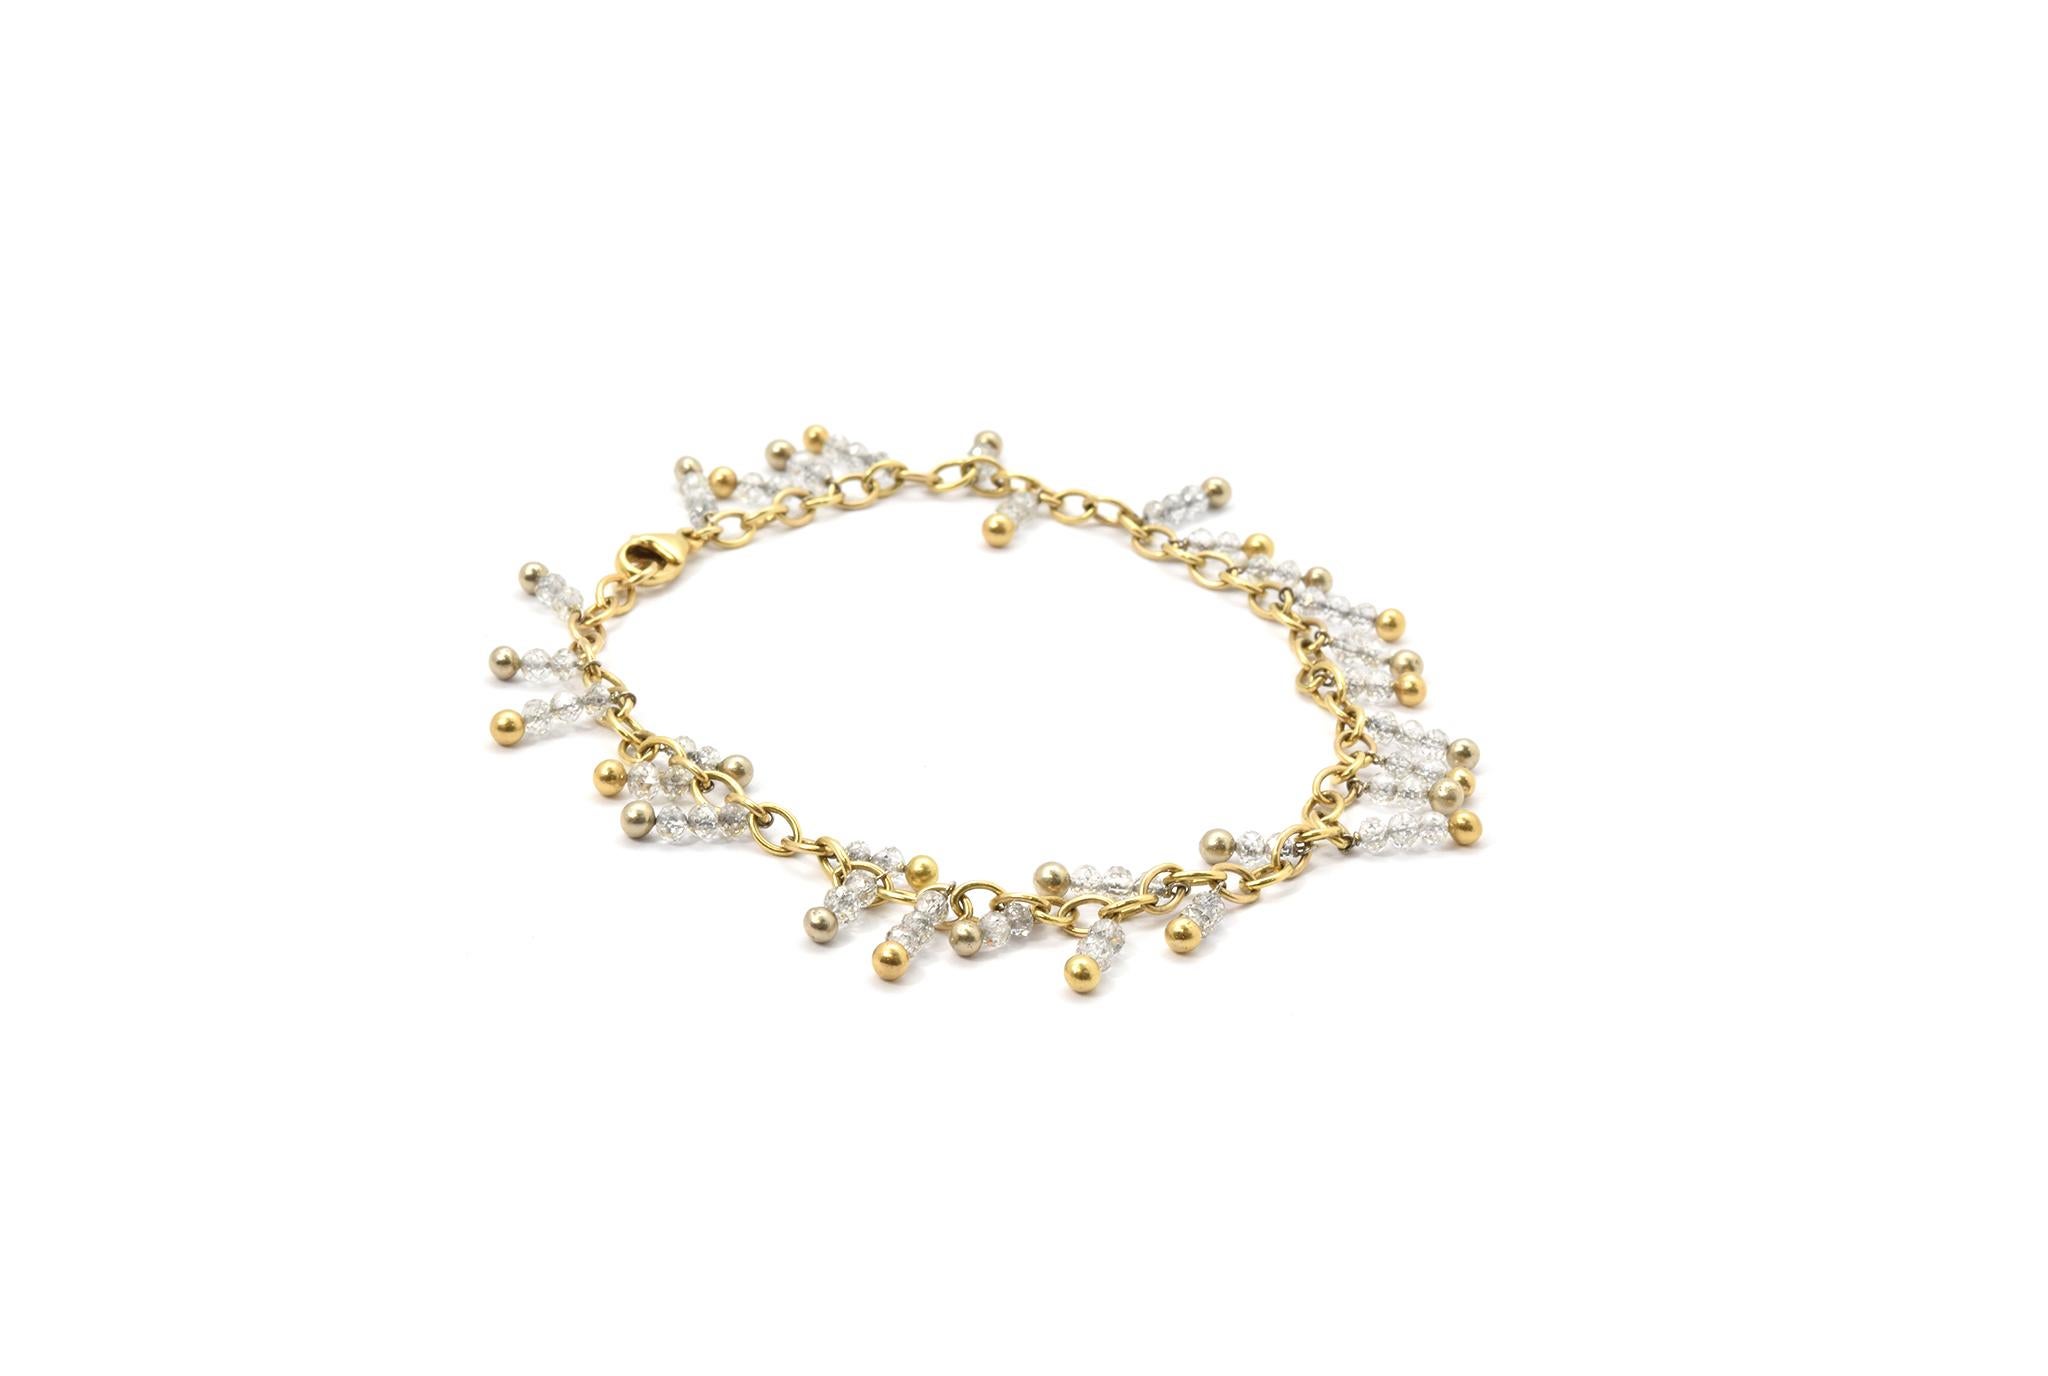 This unique bracelet is made in 18k yellow gold and platinum, and it features several diamond beads for a total approximate weight of 18 carats. The dangles measure up to 12mm long, and the bracelet will fit an ankle measuring up 10 inches around.